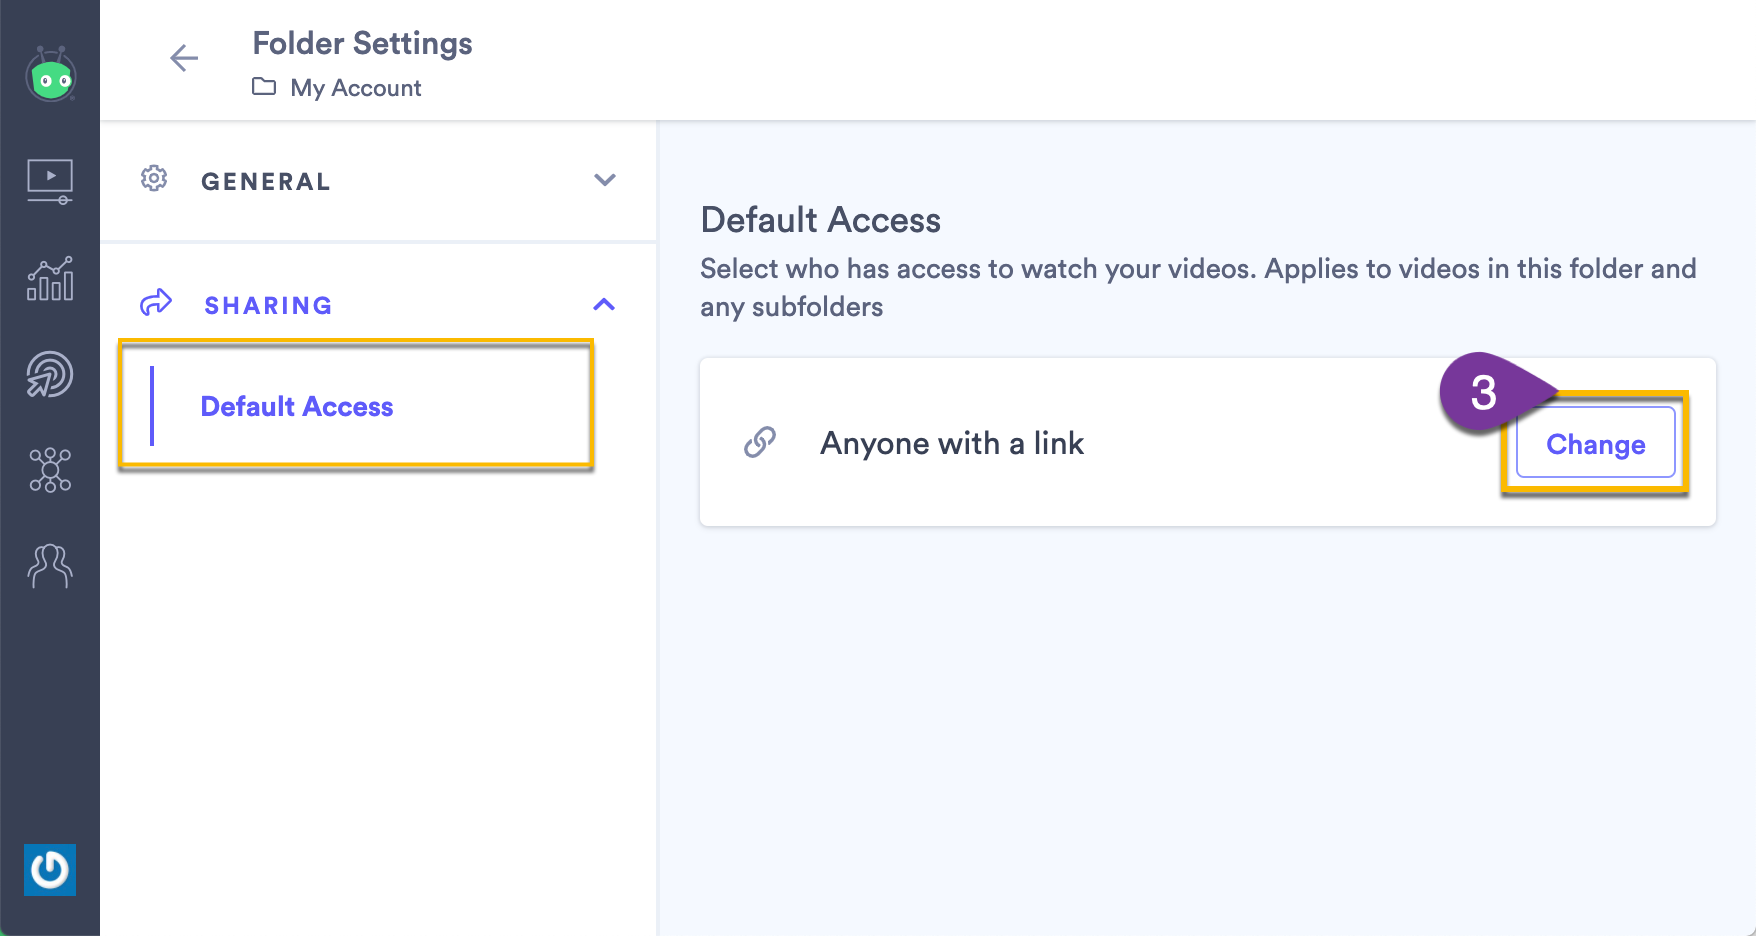 Changing the default access settings for the folder